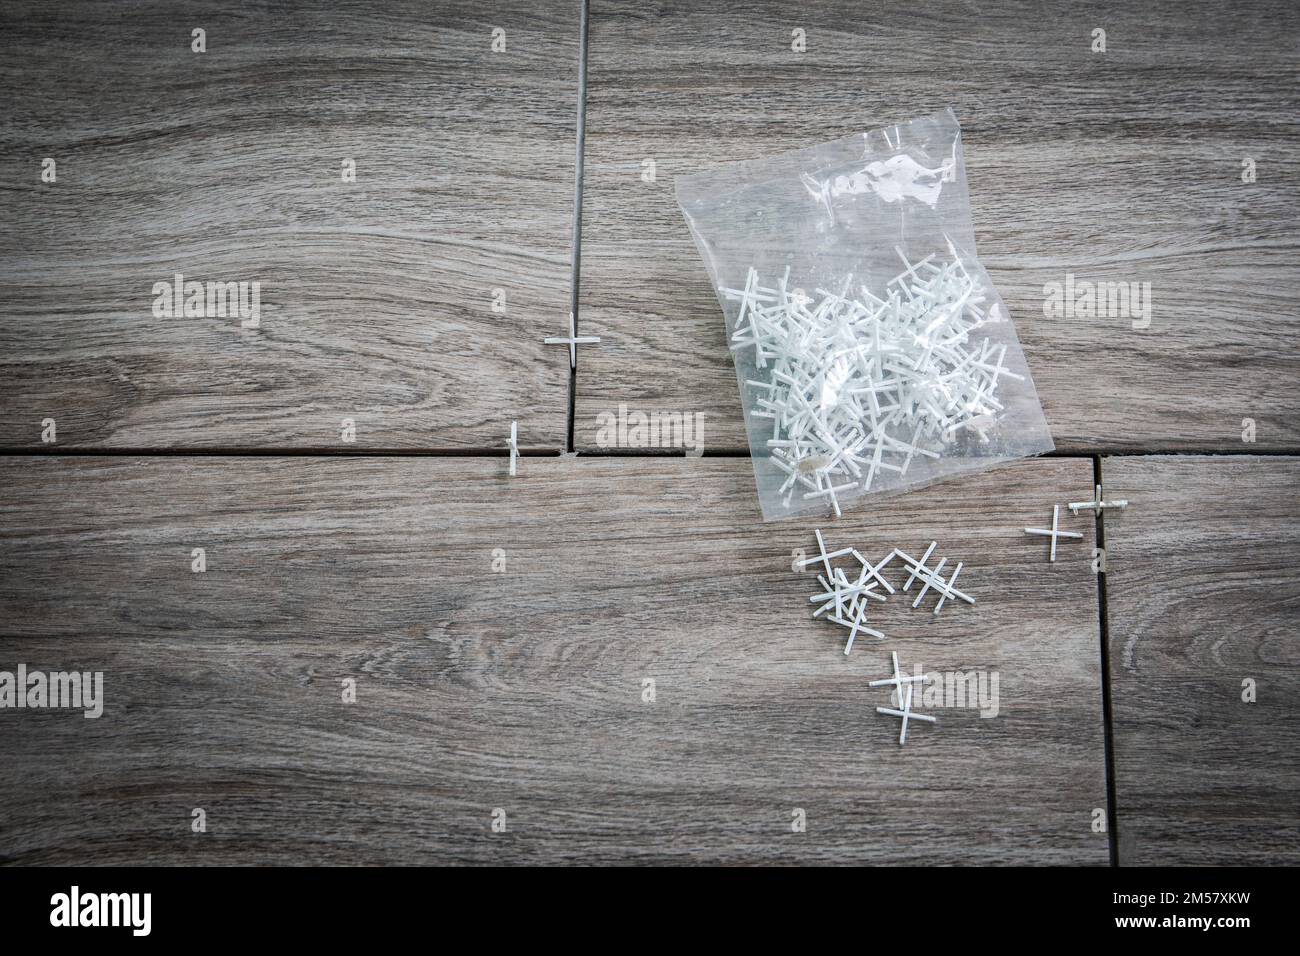 Laying ceramic tiles using plastic crosses. Packaging on the floor. Renovation or repair concept. Stock Photo